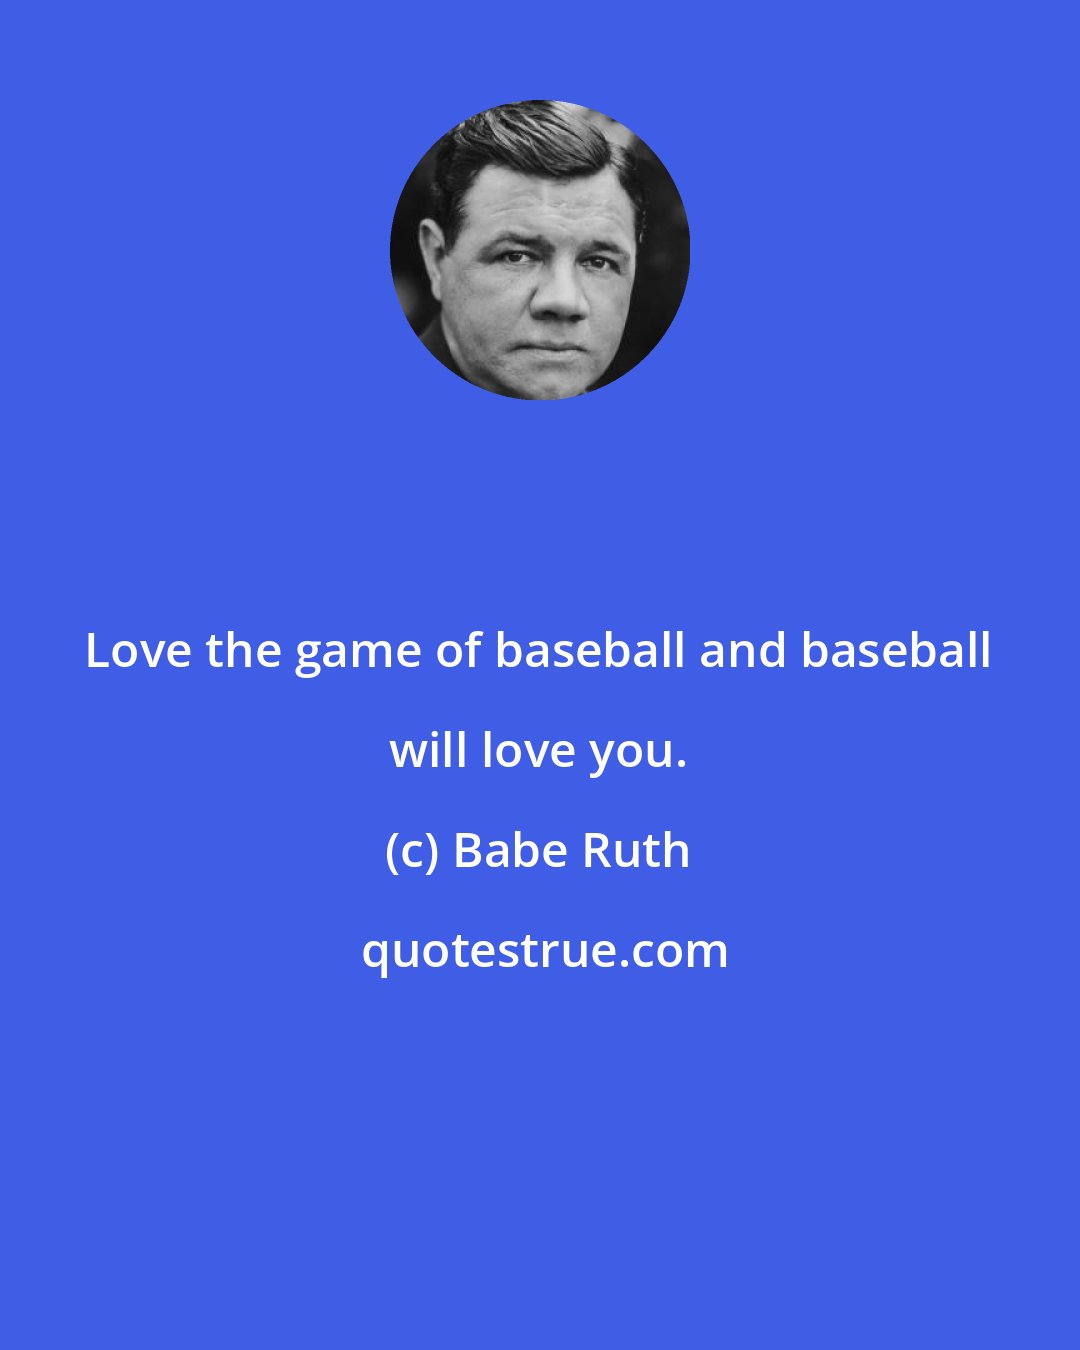 Babe Ruth: Love the game of baseball and baseball will love you.